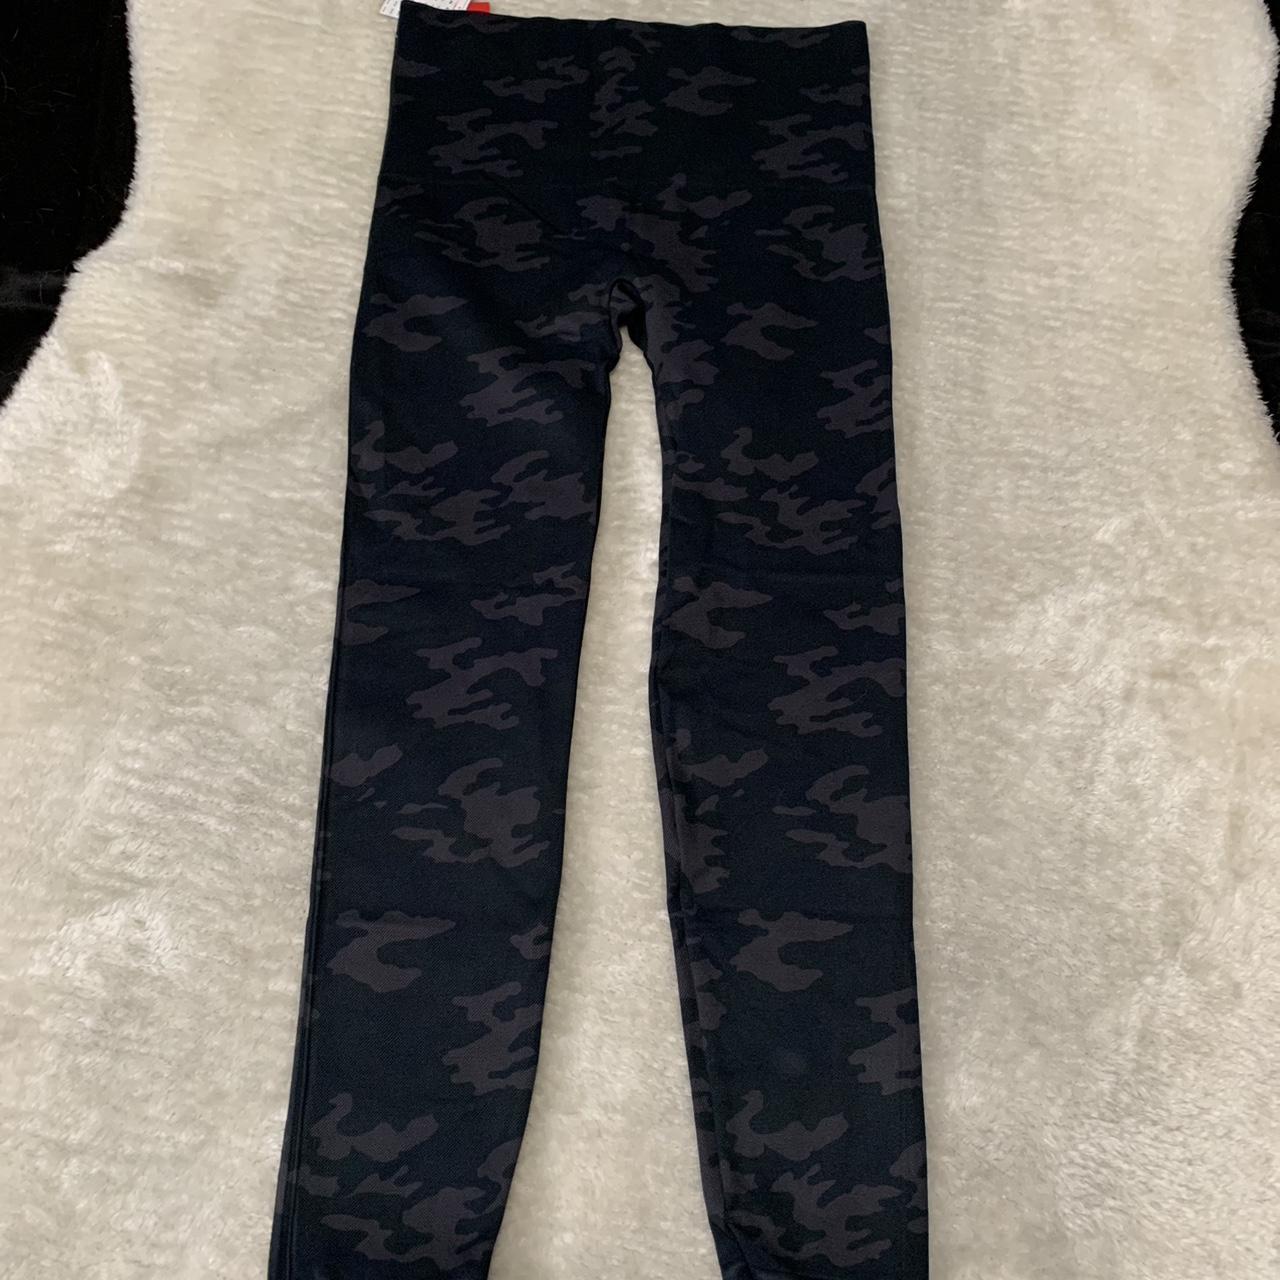 SPANX Look At Me Now Seamless Legging in Black Camo, - Depop